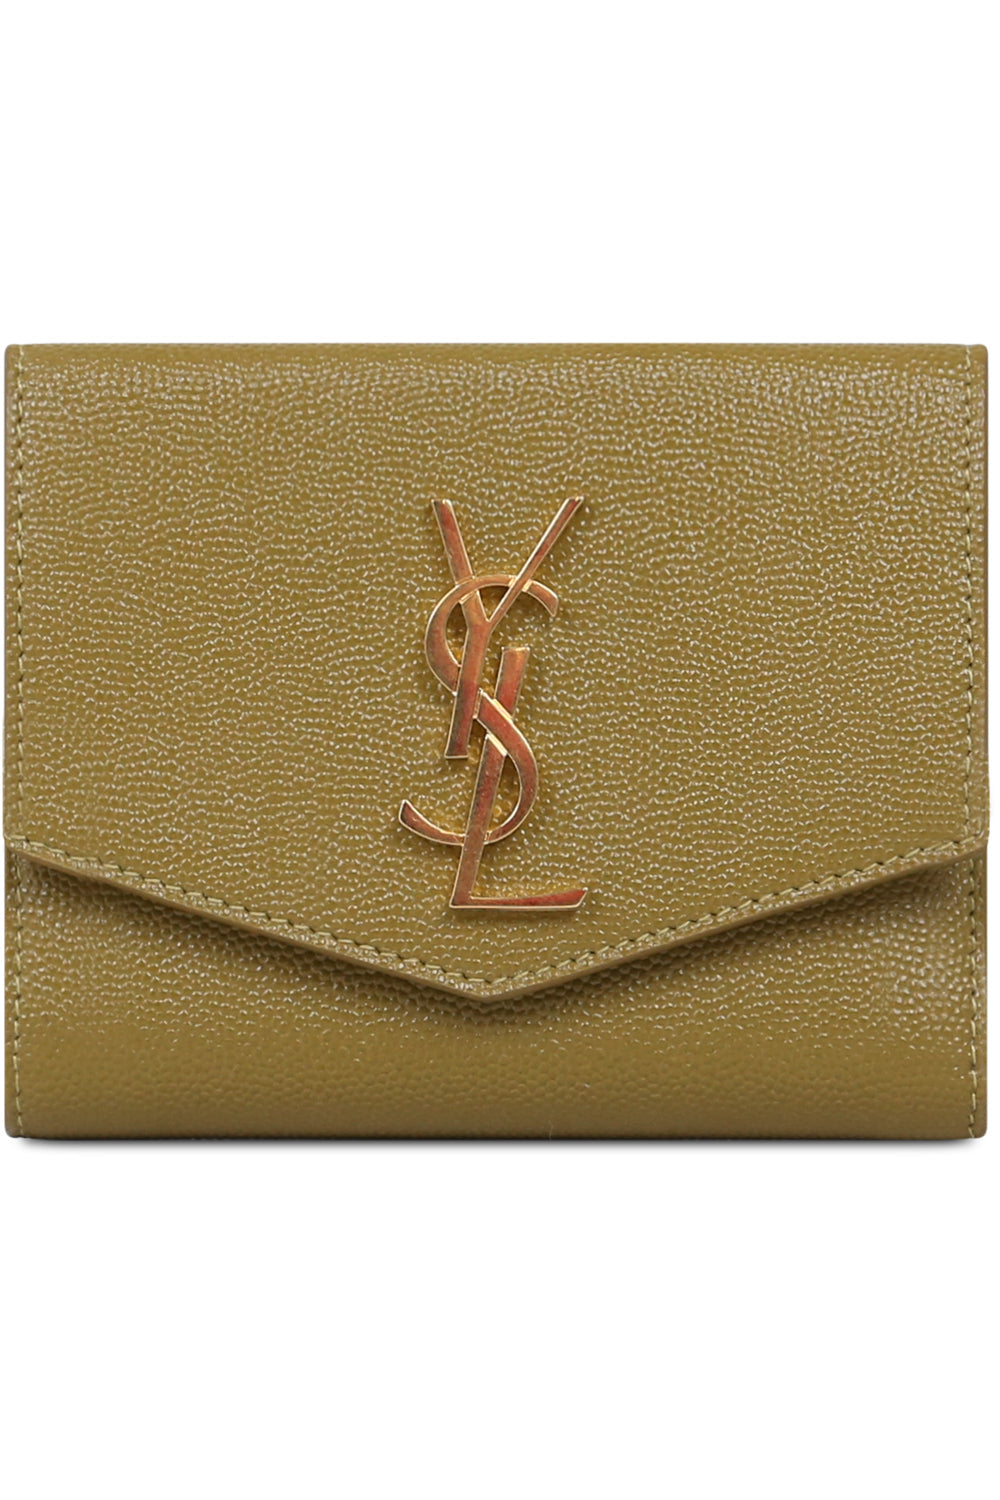 SAINT LAURENT BAGS GREEN UPTOWN SQUARE WALLET OLIVE/GOLD